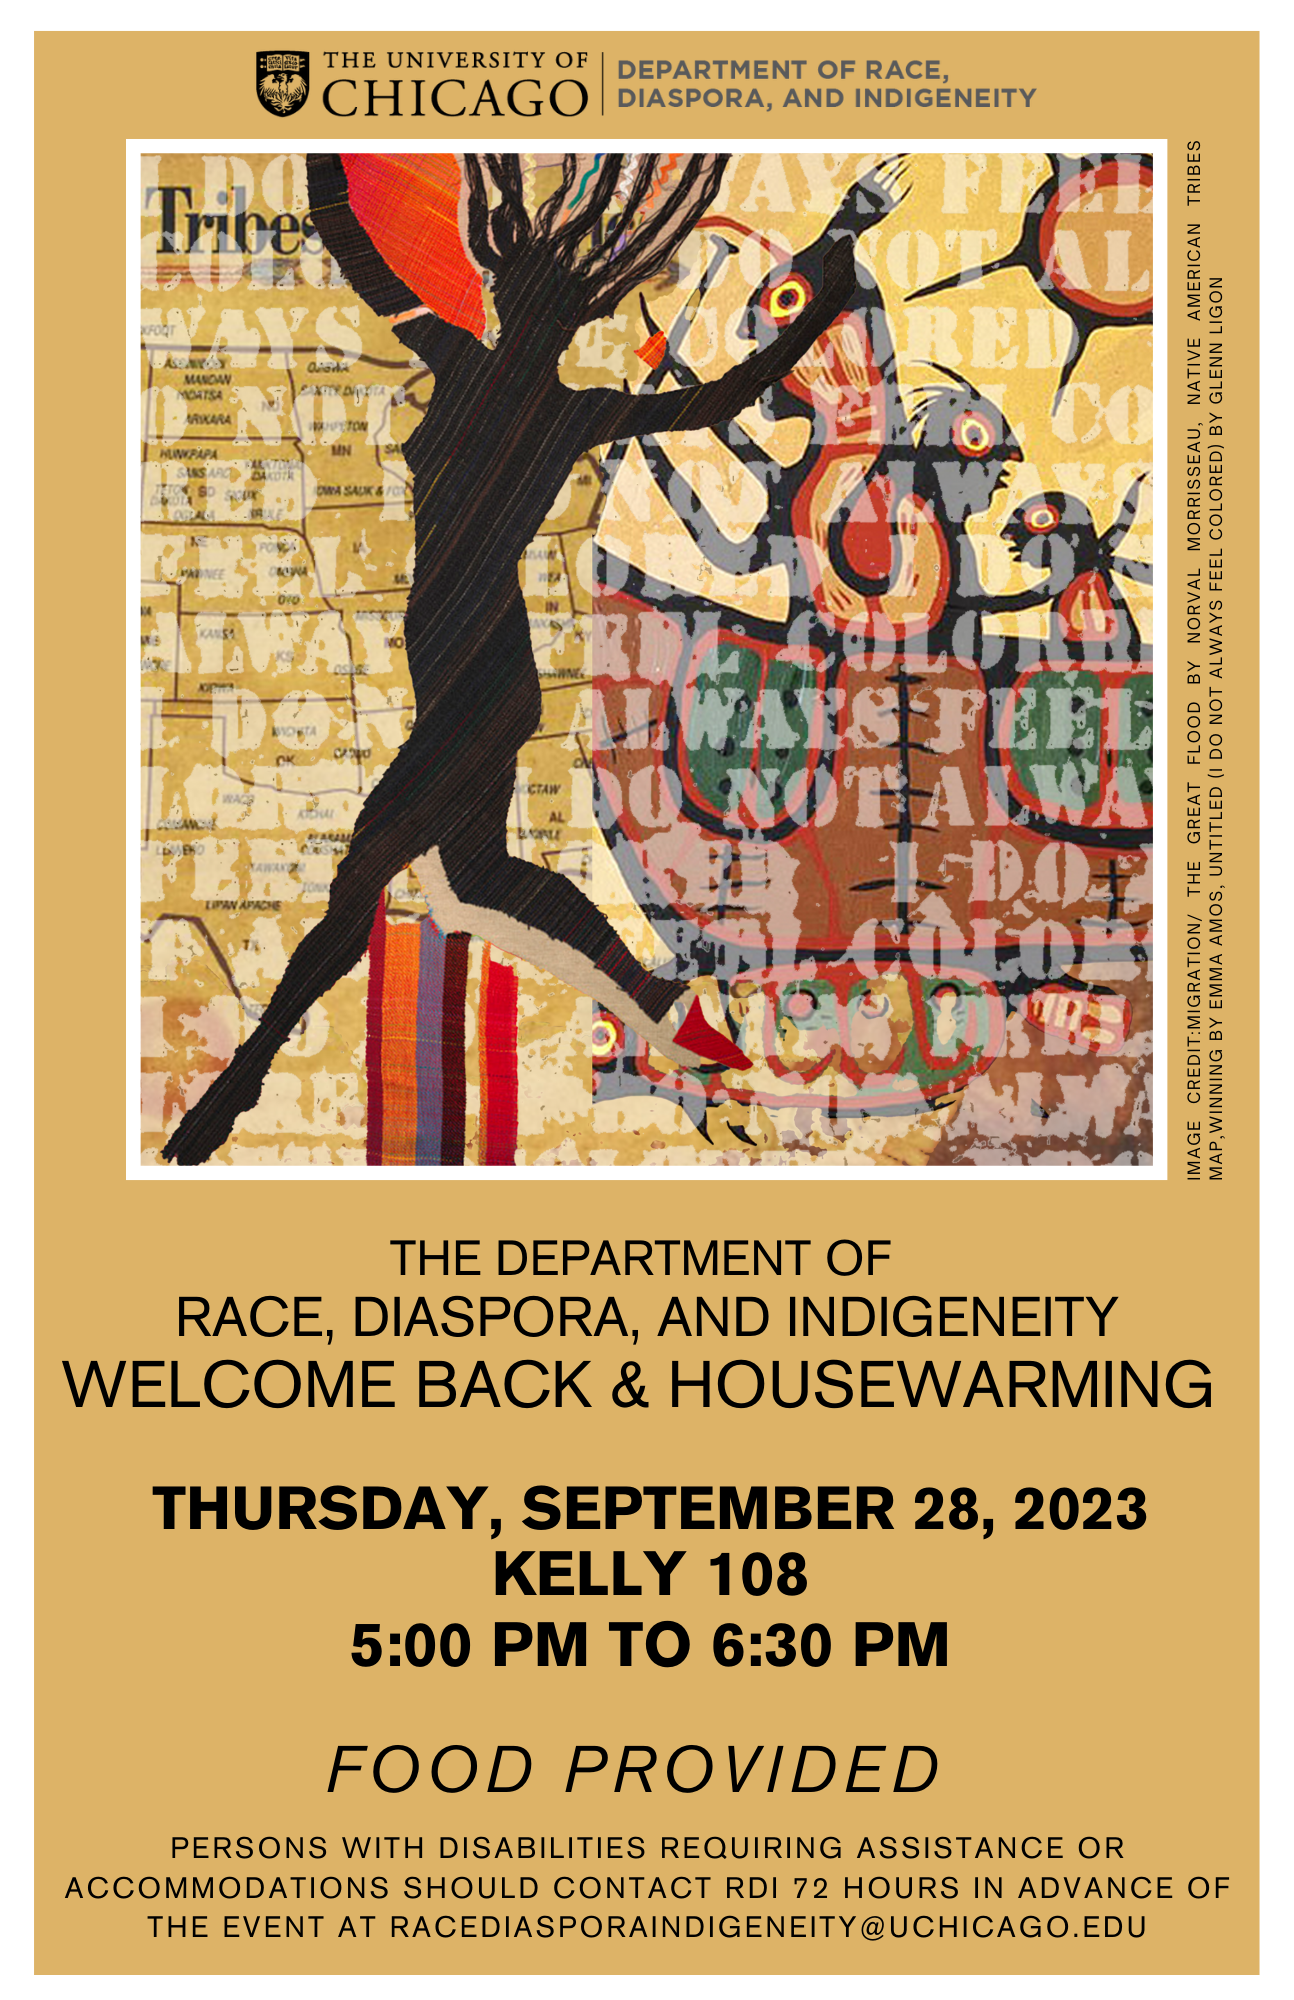 "RDI Welcome Back and House Warming. Thursday, September 28, 2023  Kelly 108  5:00 PM to 6:30 PM     Persons with disabilities requiring assistance or accommodations should contact RDI 72 hours in advance of the event at RaceDiasporaIndigeneity@uchicago.edu